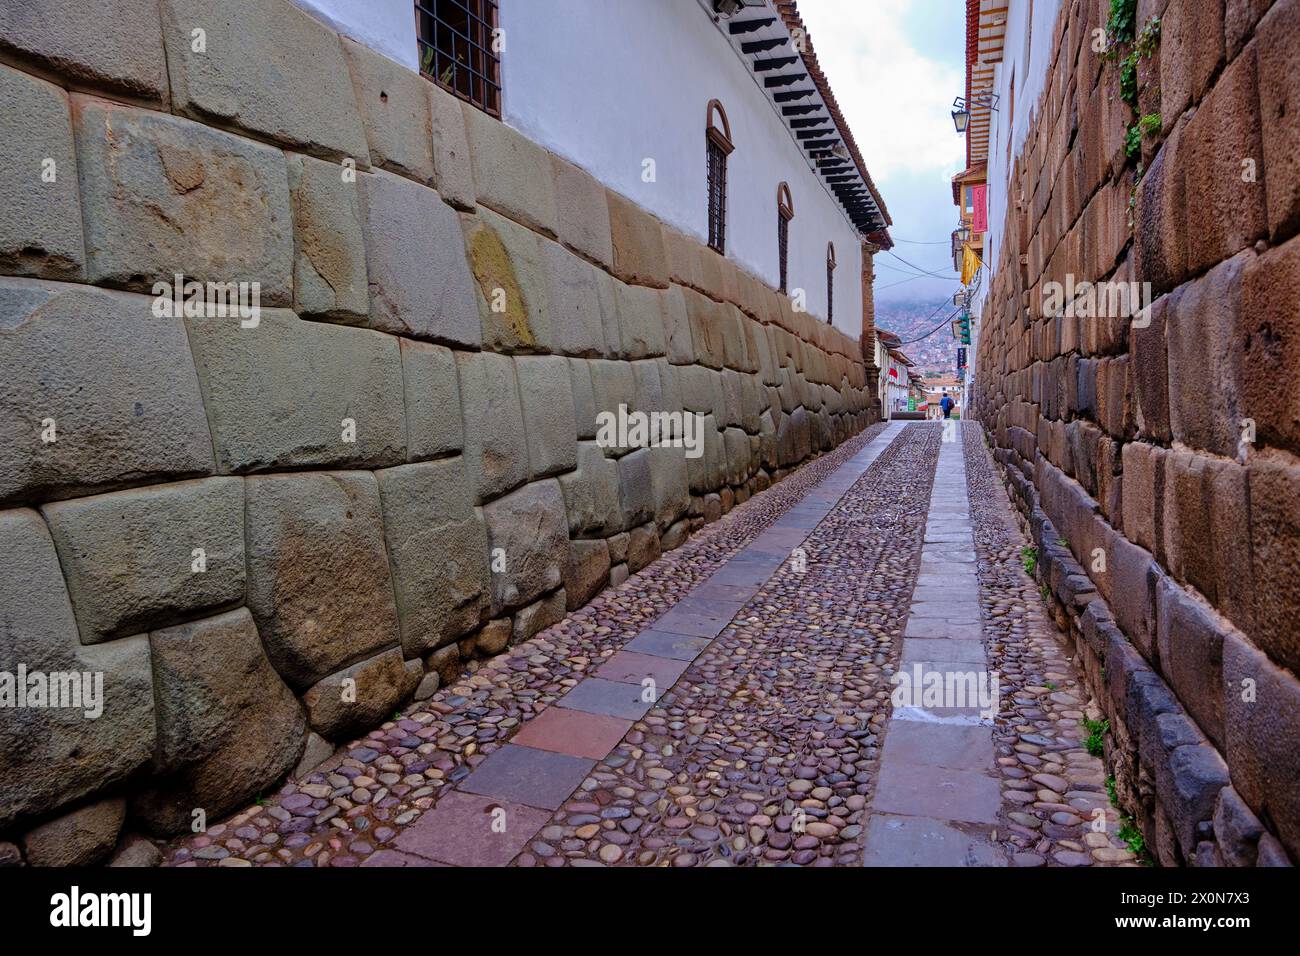 Peru, province of Cuzco, Cuzco, listed as a UNESCO World Heritage Site, Calle Hatun Rumiyoc, fragment of wall of the ancient Inca city Stock Photo